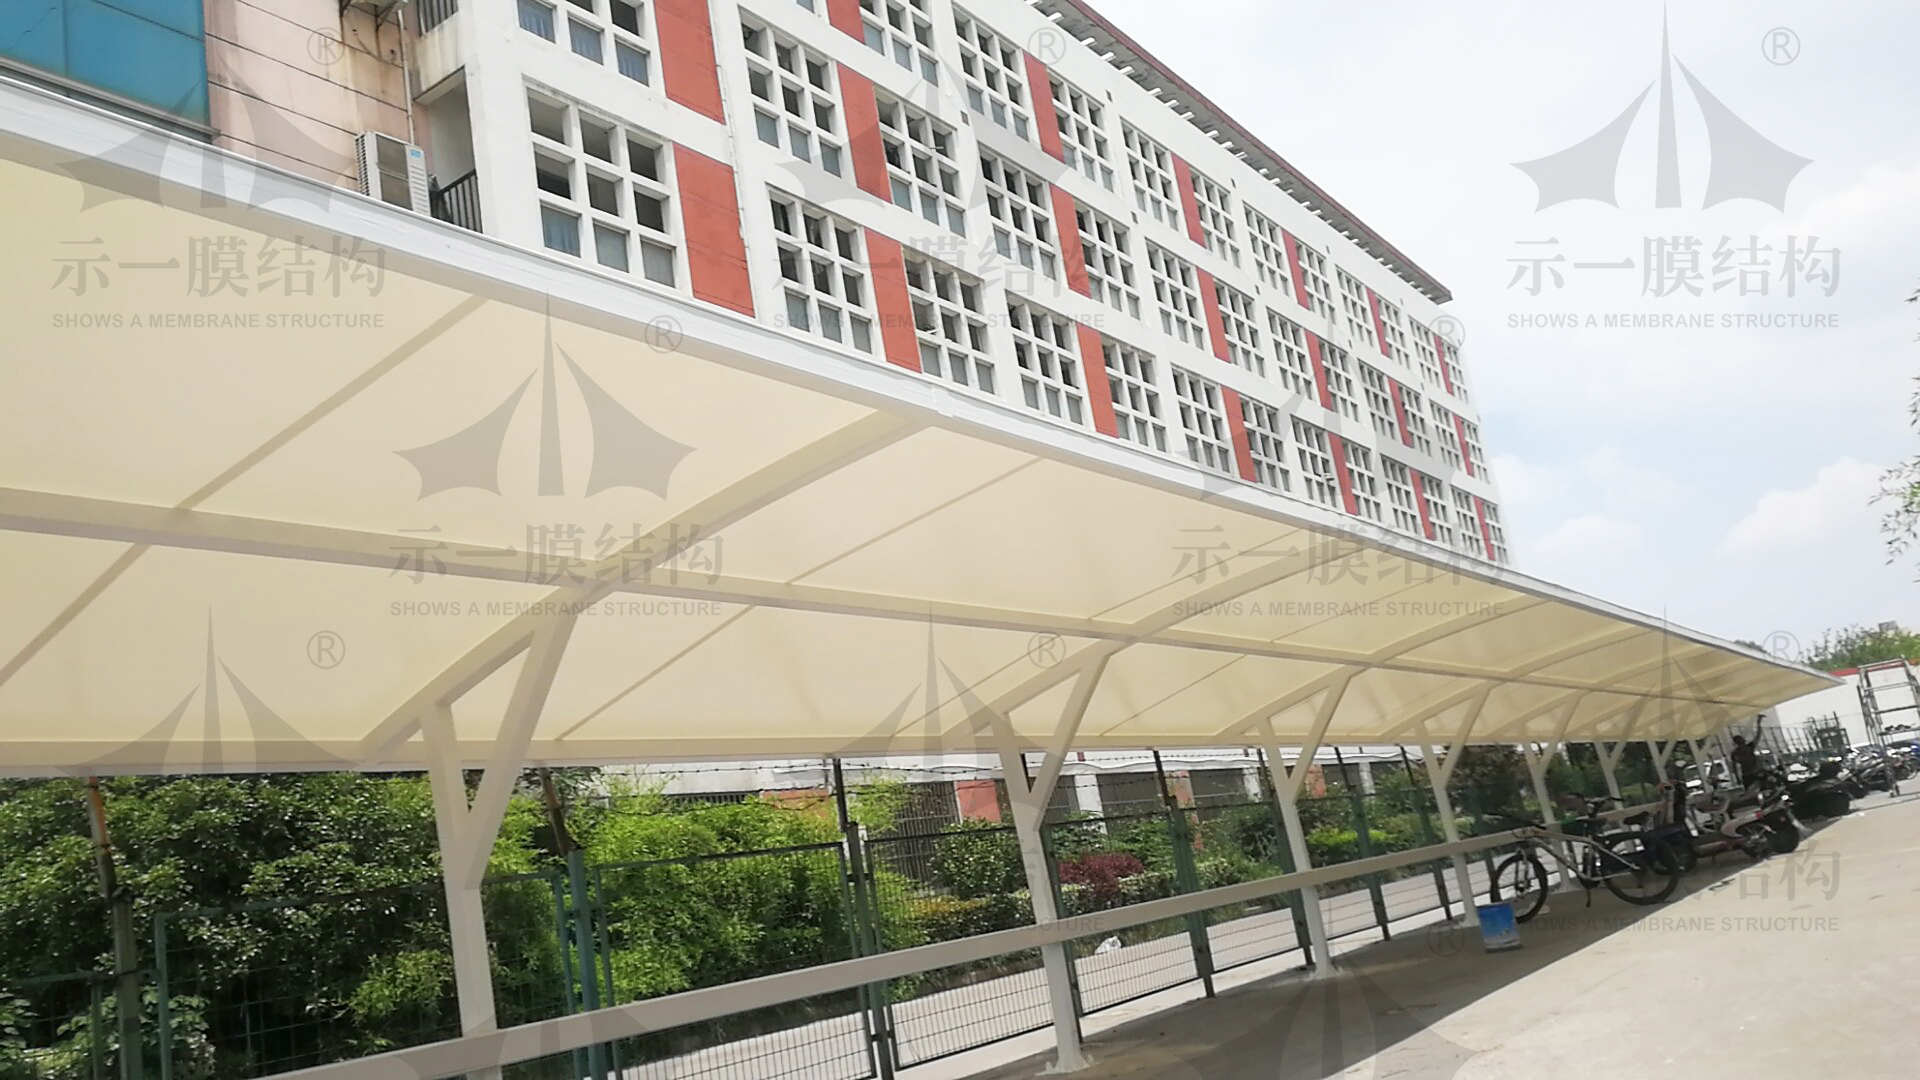 Demystifying the production process of the membrane structure carport